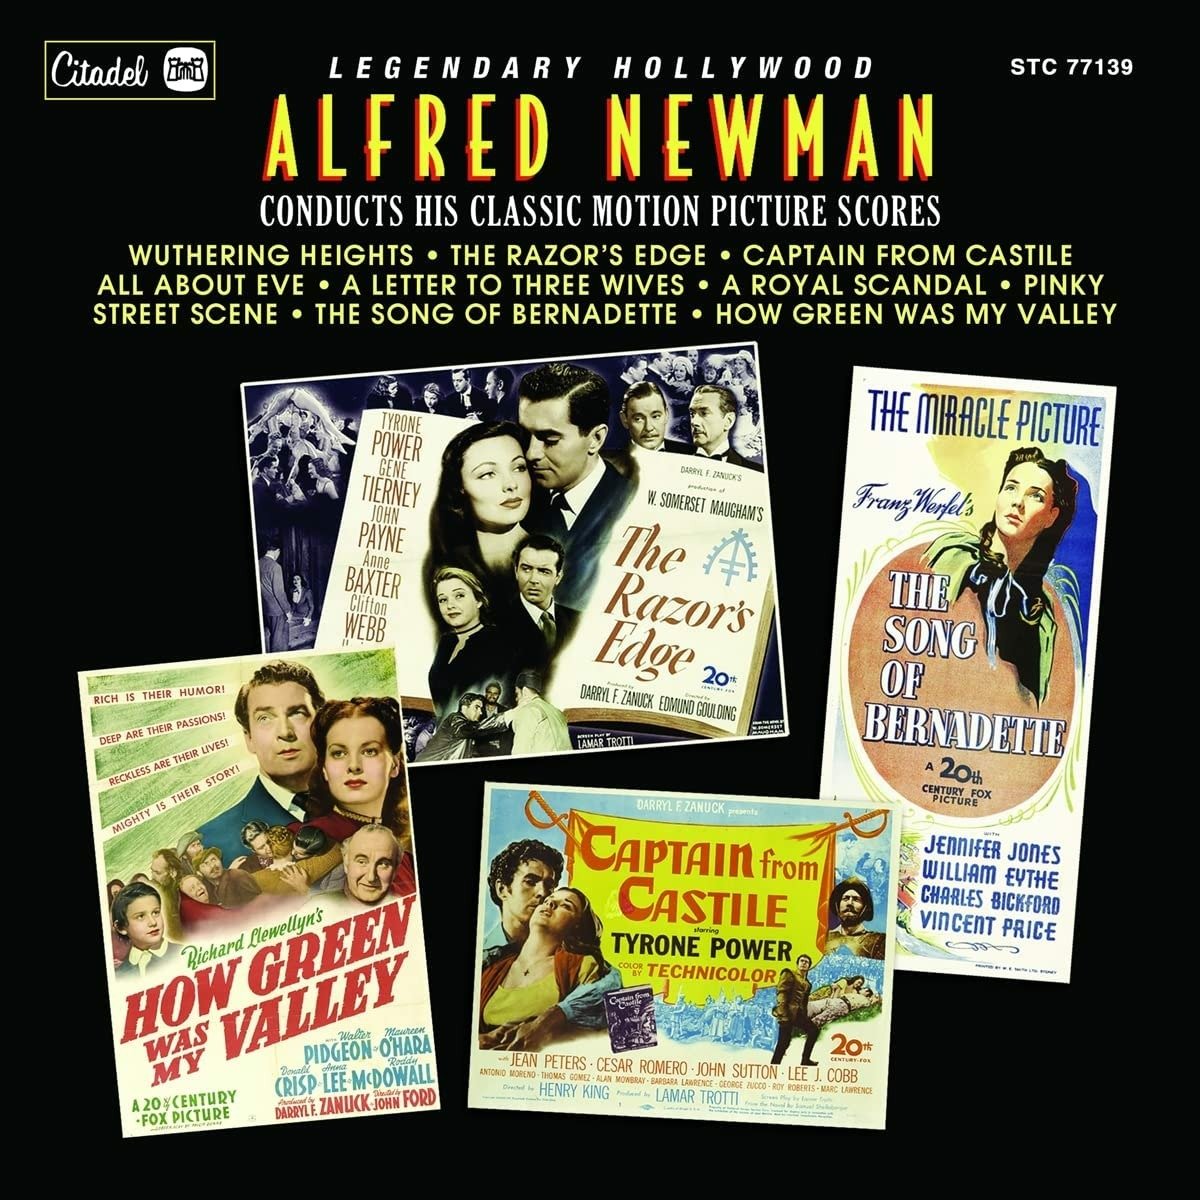 CD Shop - NEWMAN, ALFRED LEGENDARY HOLLYWOOD: ALFRED NEWMAN CONDUCTS HIS CLASSIC MOTION PICTURES